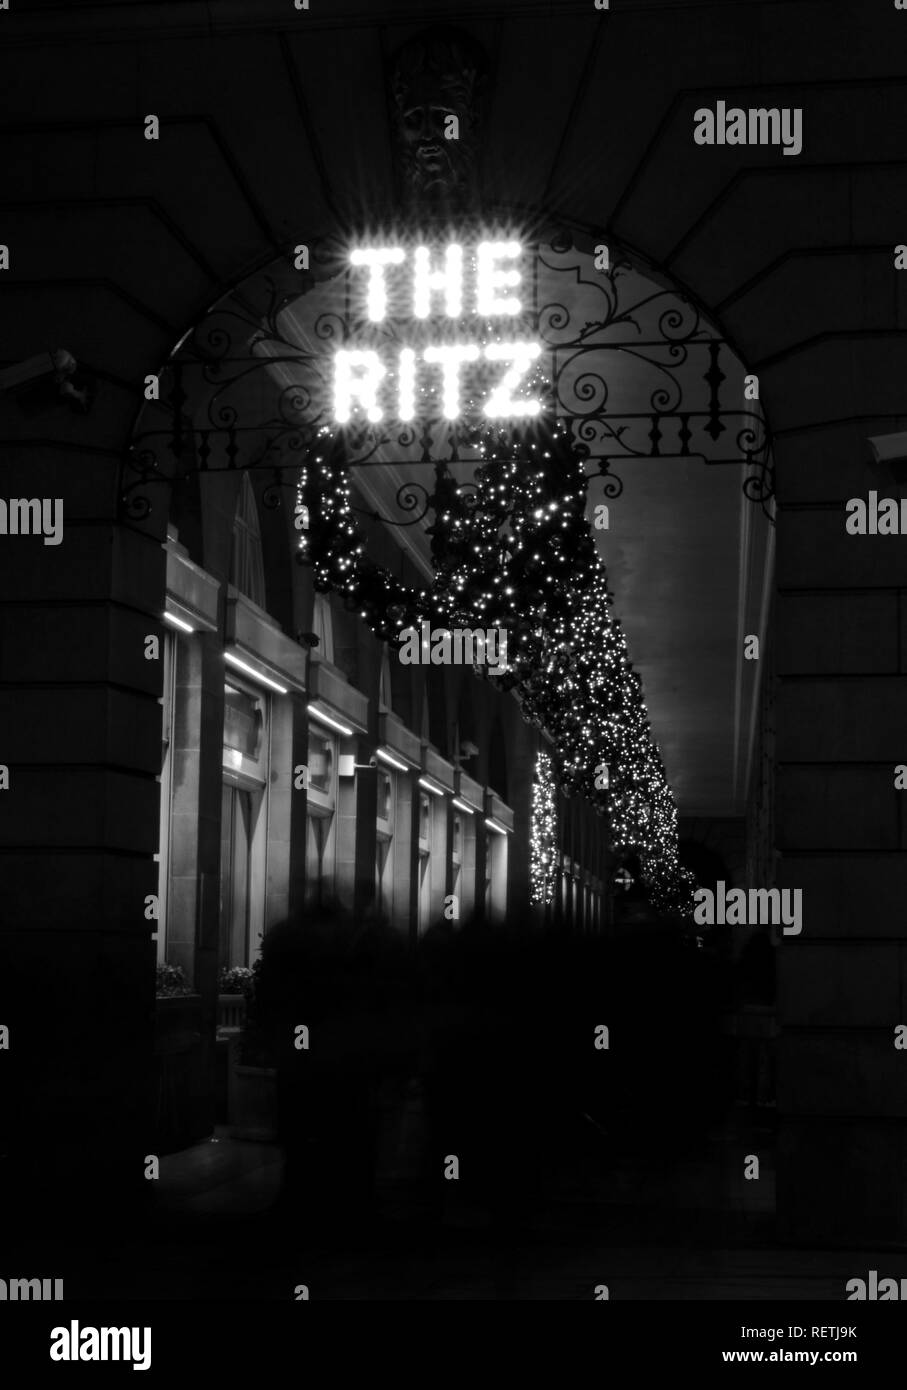 Pavement of Piccadilly in front of the Ritz hotel at Christmas, London, UK. Stock Photo